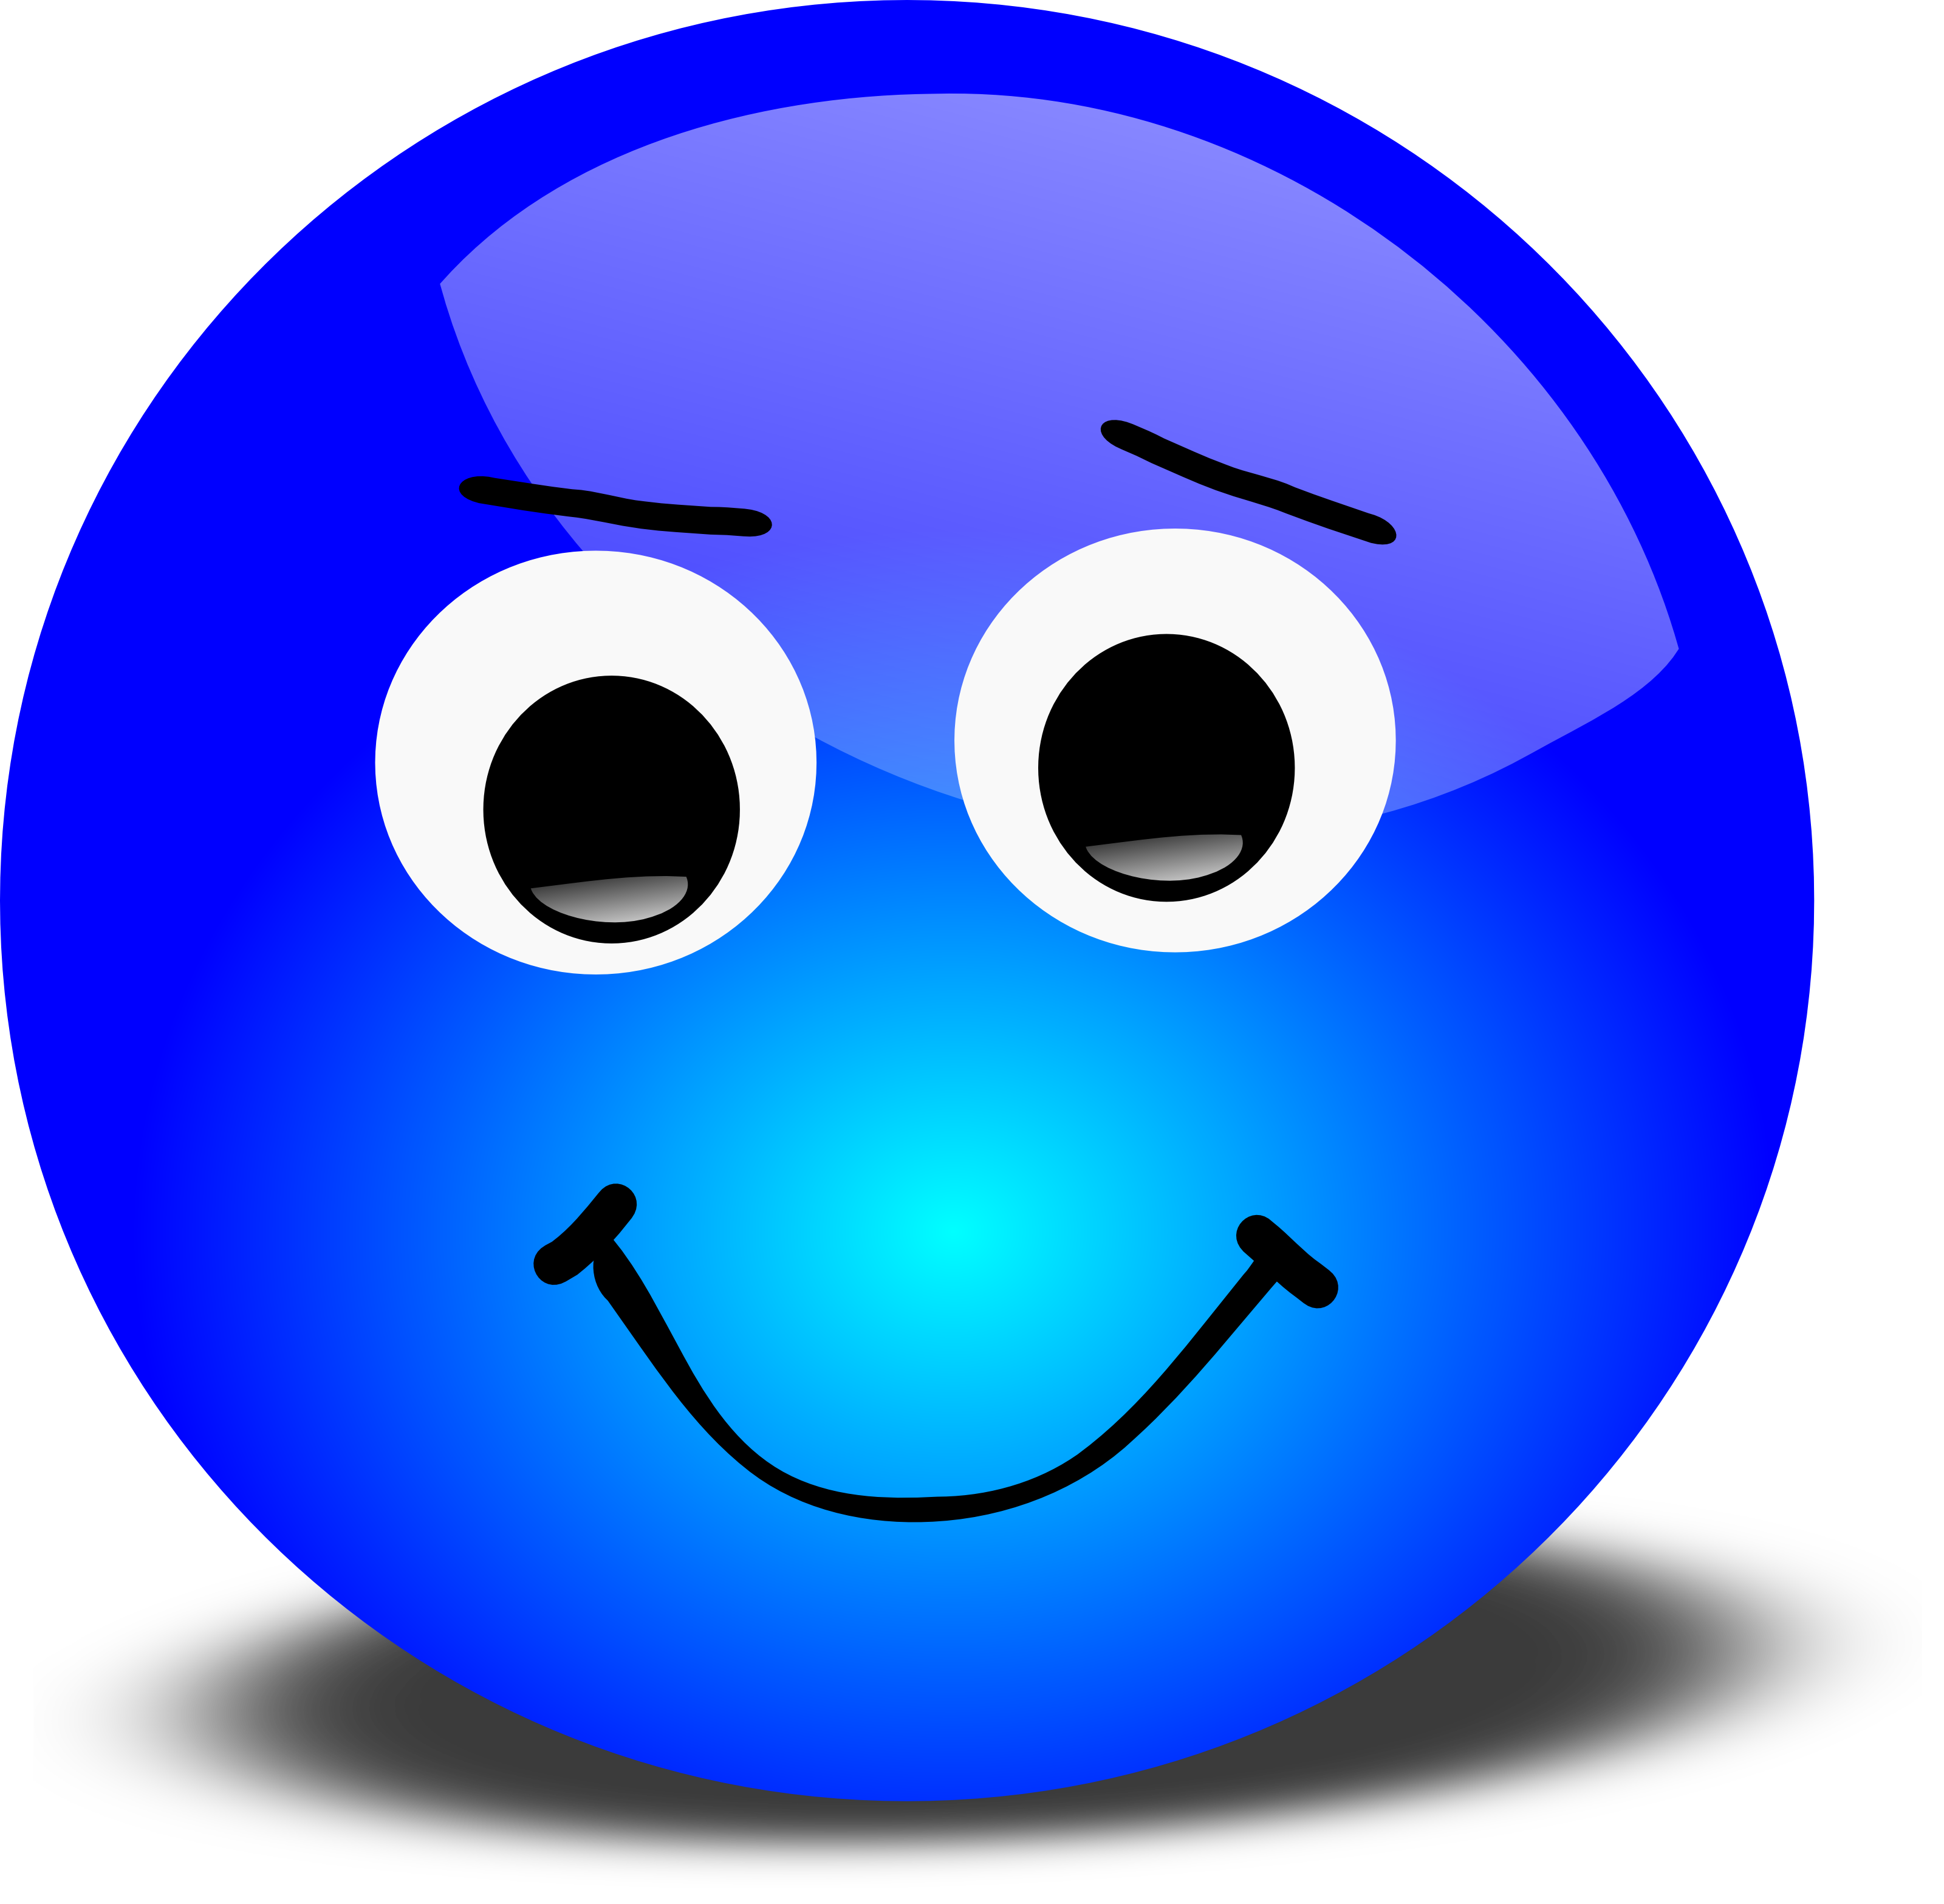 Free Clipart Of Sad Smiley Faces - ClipArt Best